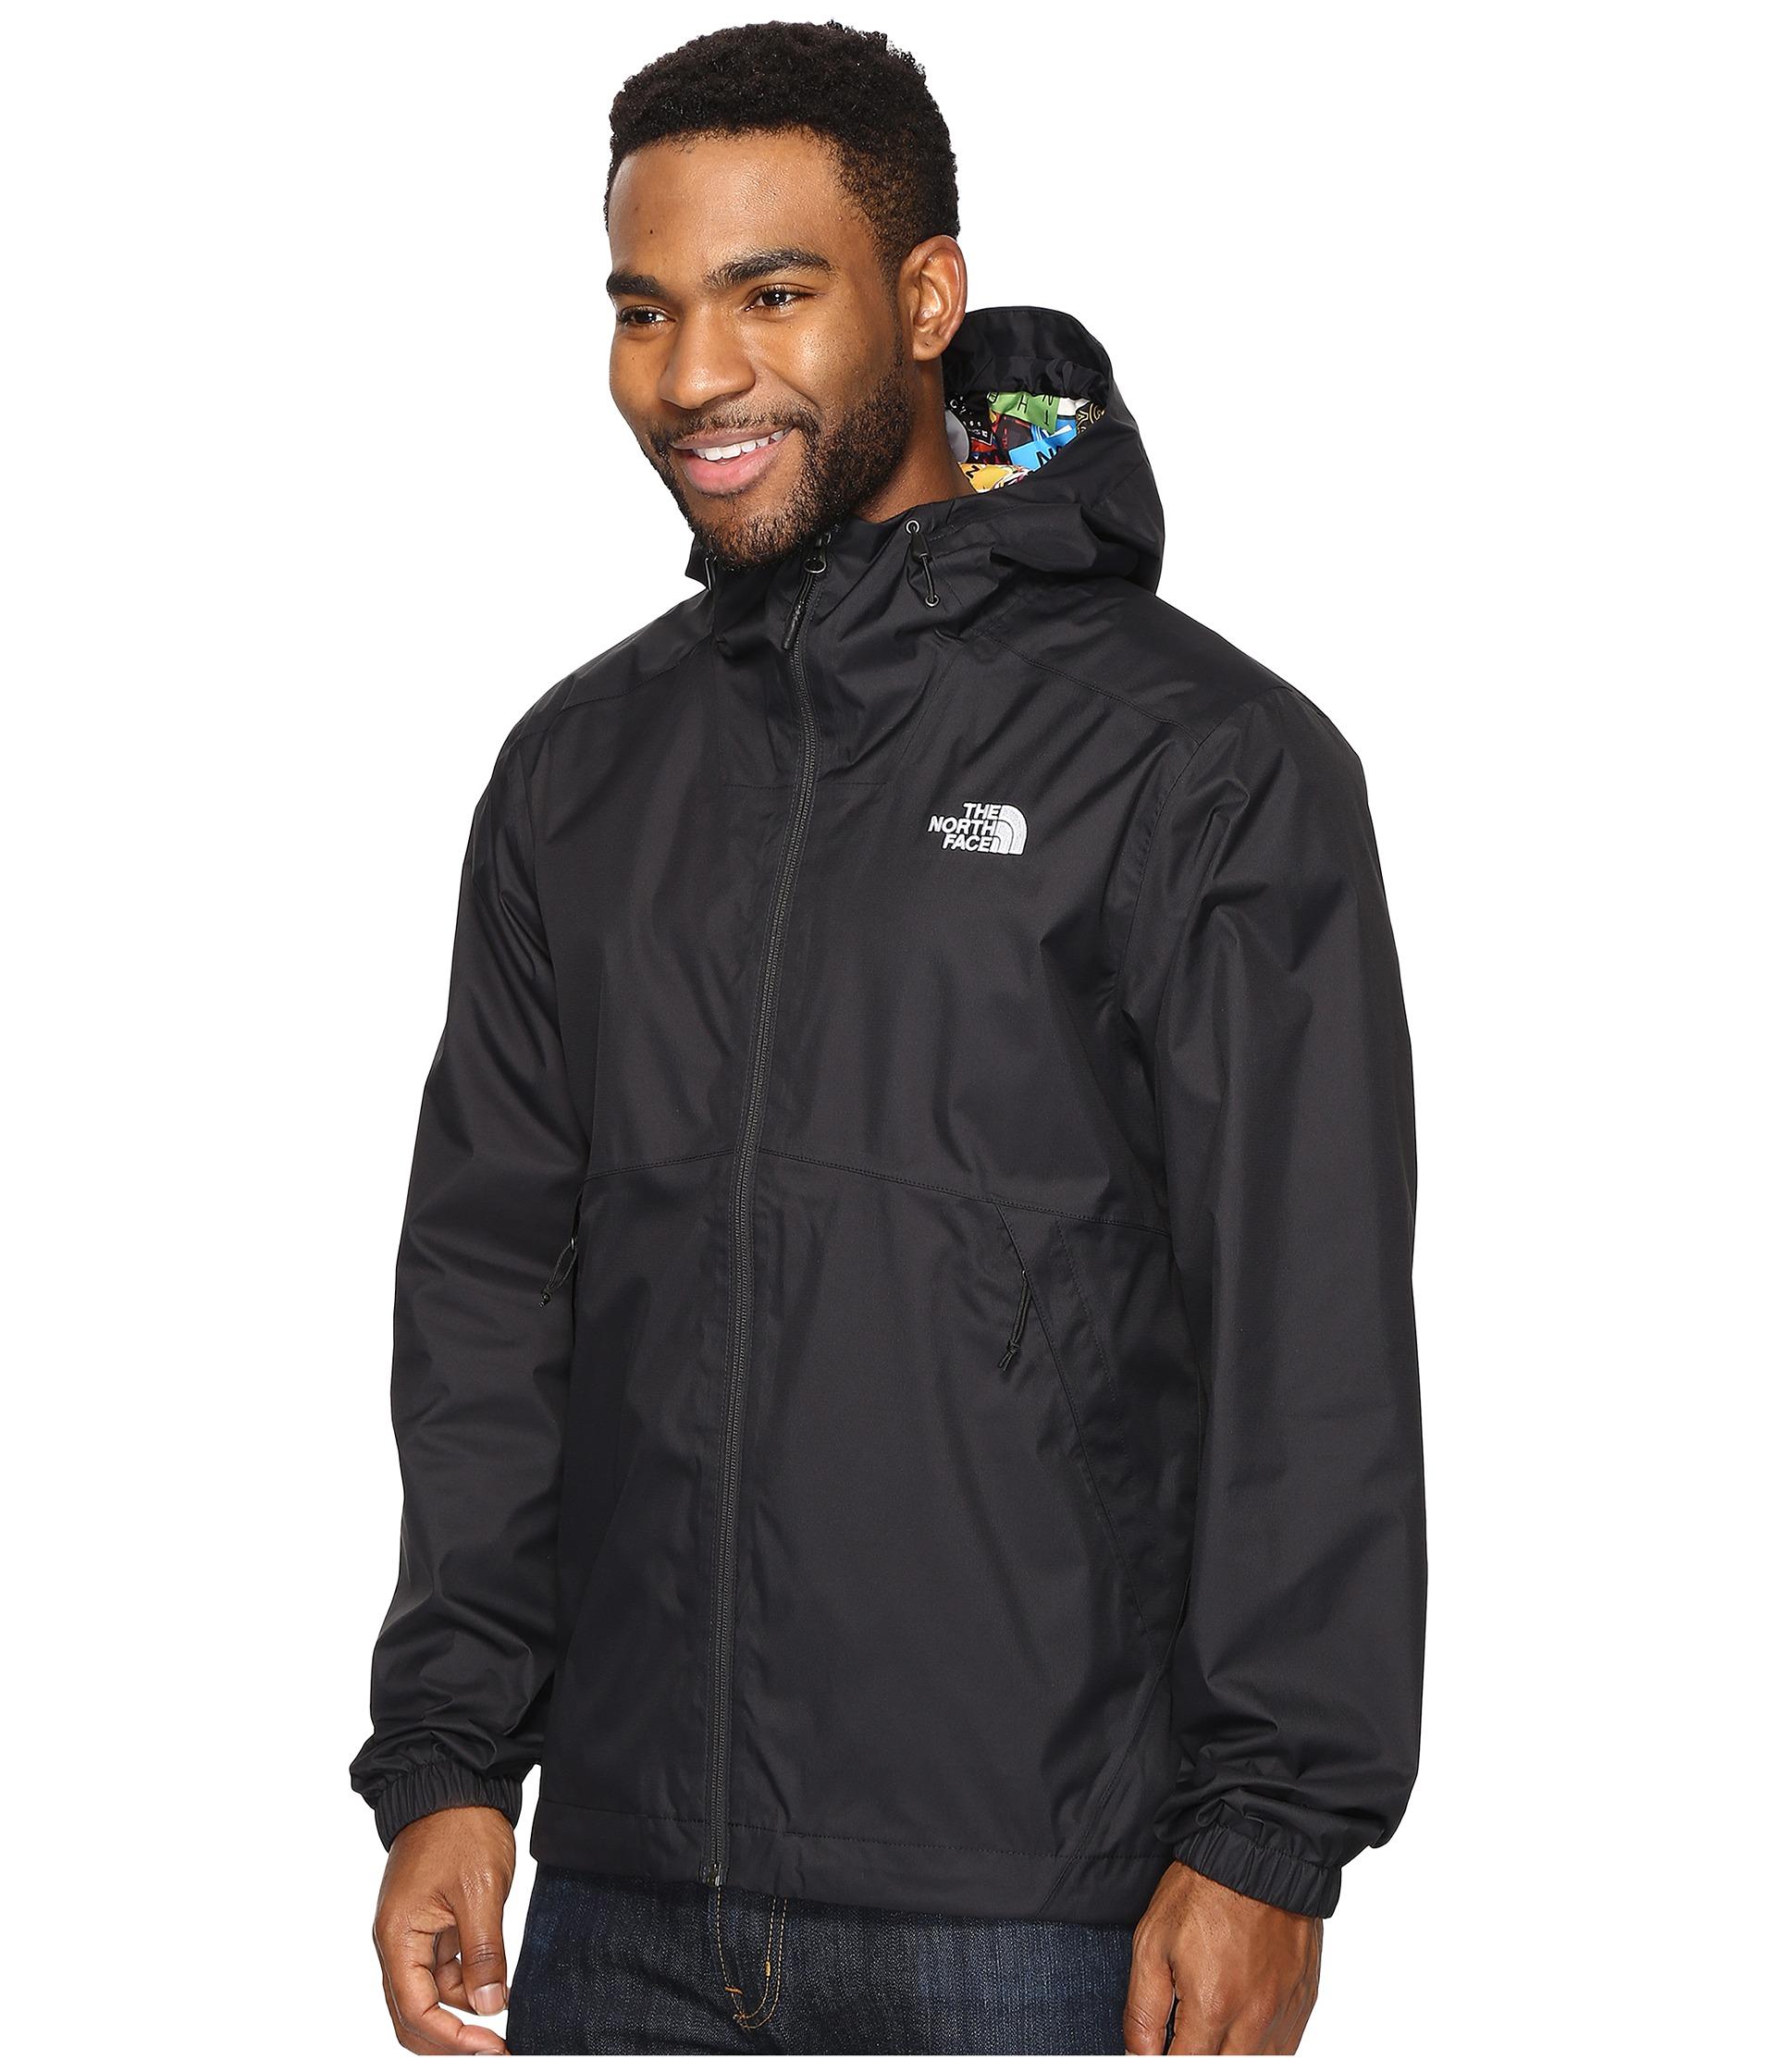 The North Face Synthetic Millerton Jacket in Black for Men - Lyst